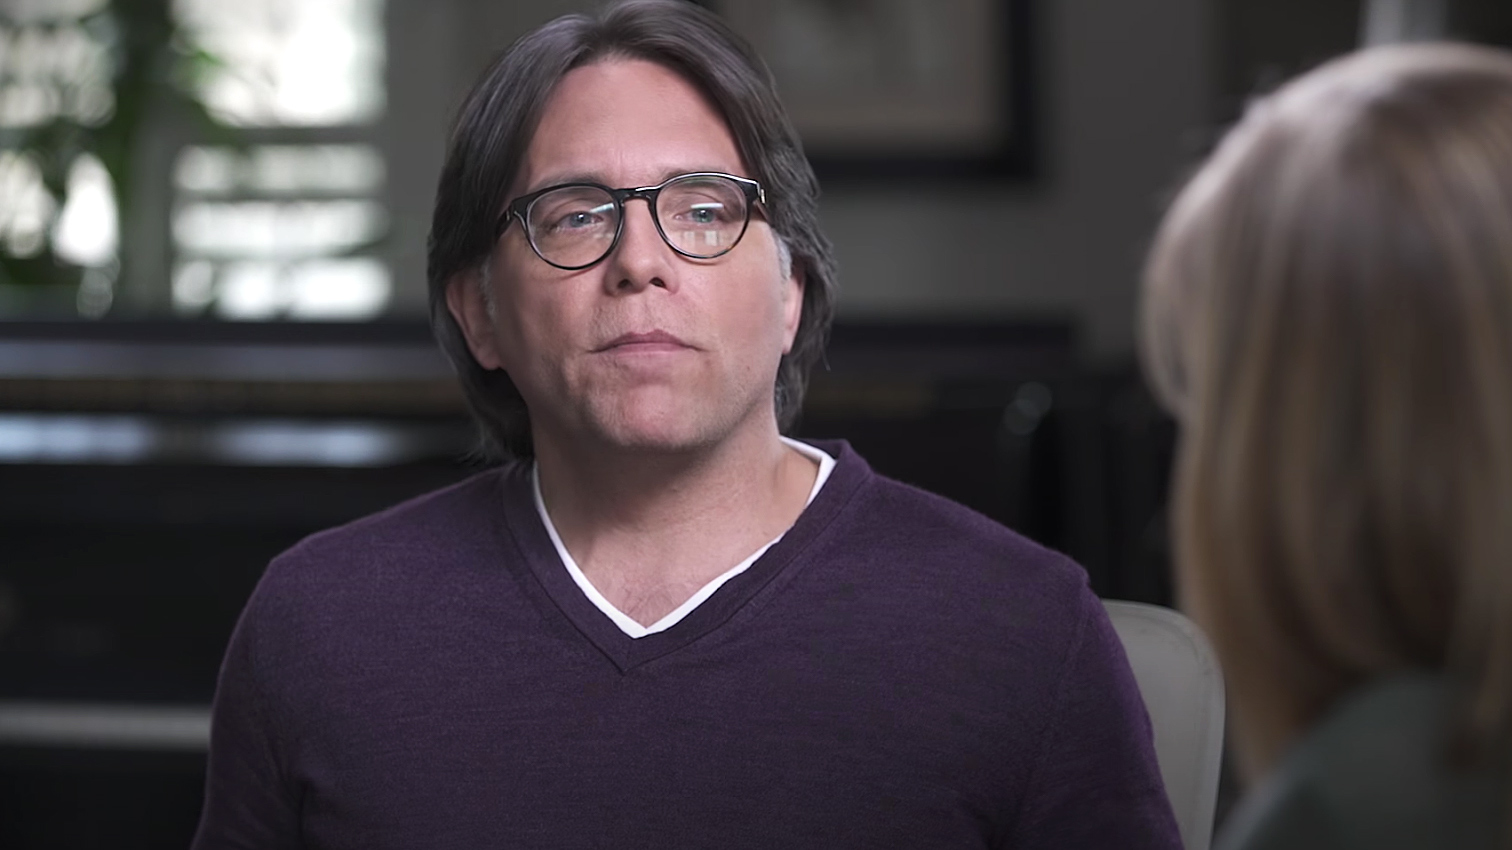 Keith Raniere Sentenced To Prison For Nxivm Sex Cult 5271